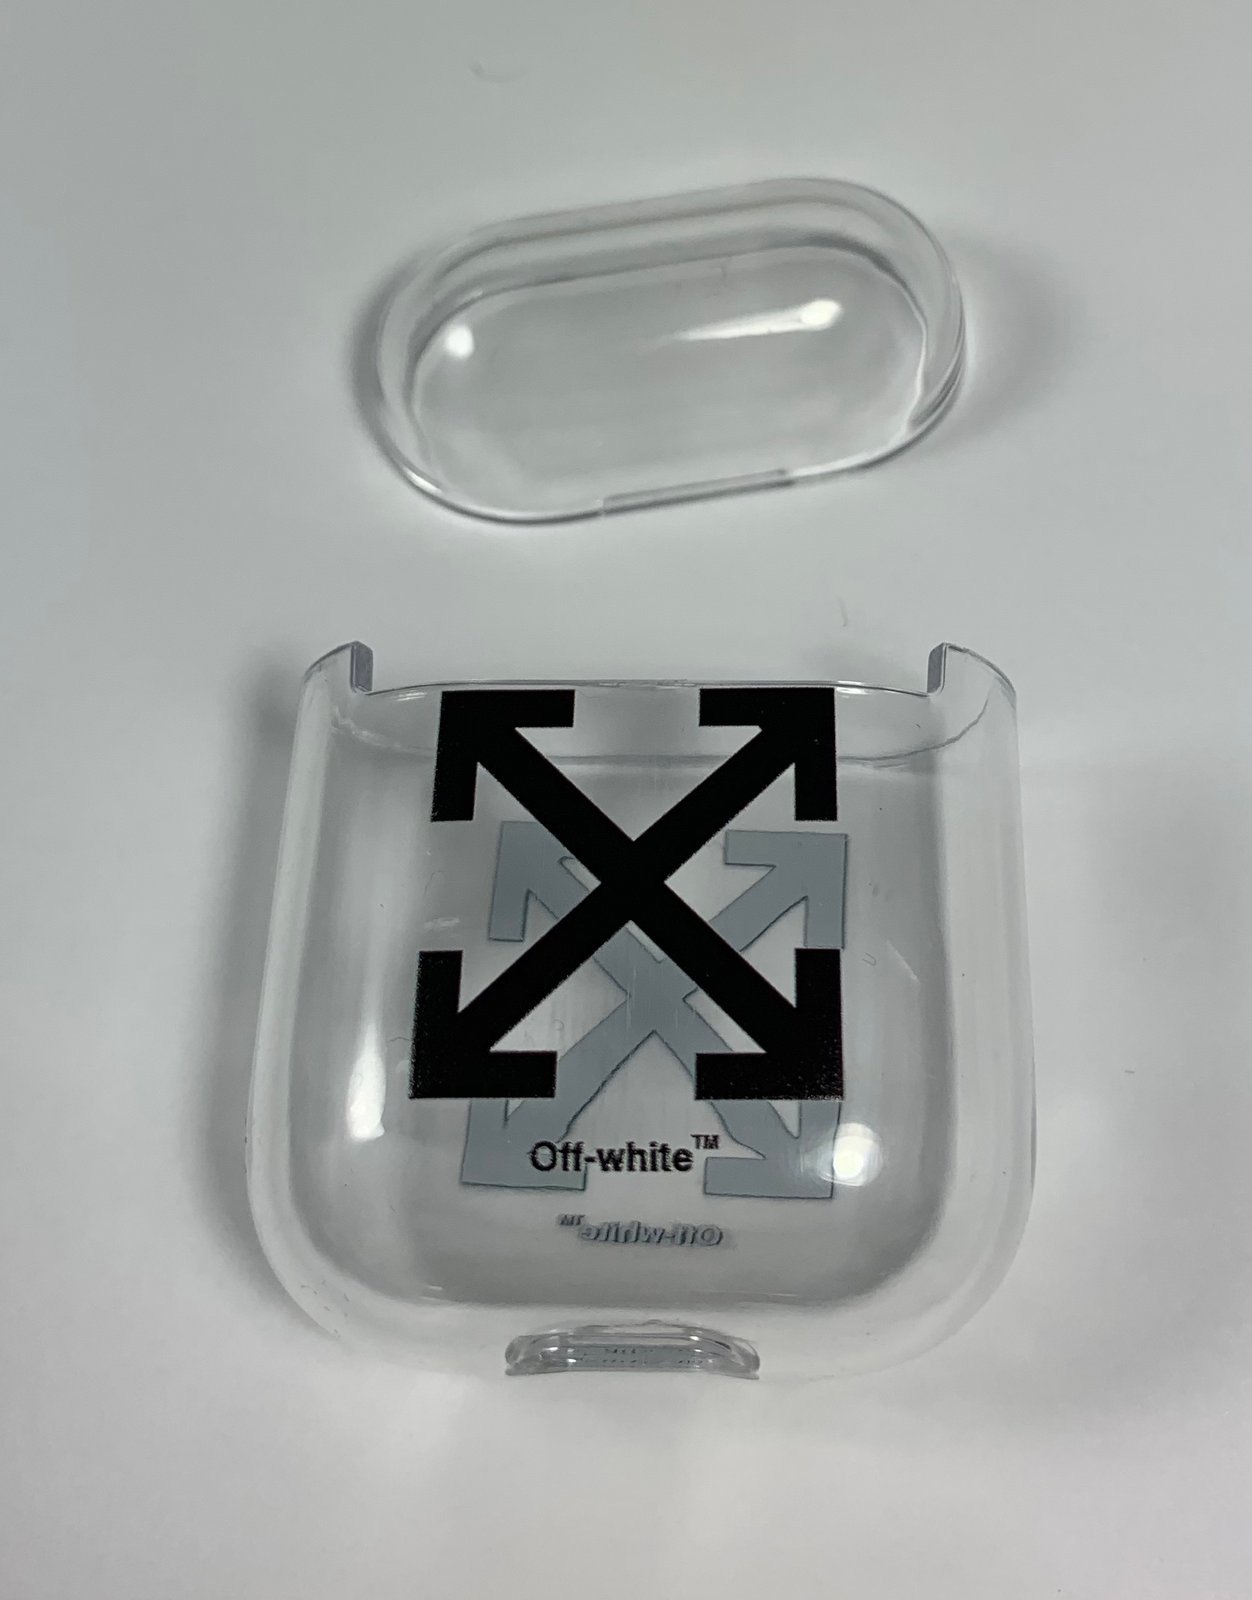 real off white airpod case